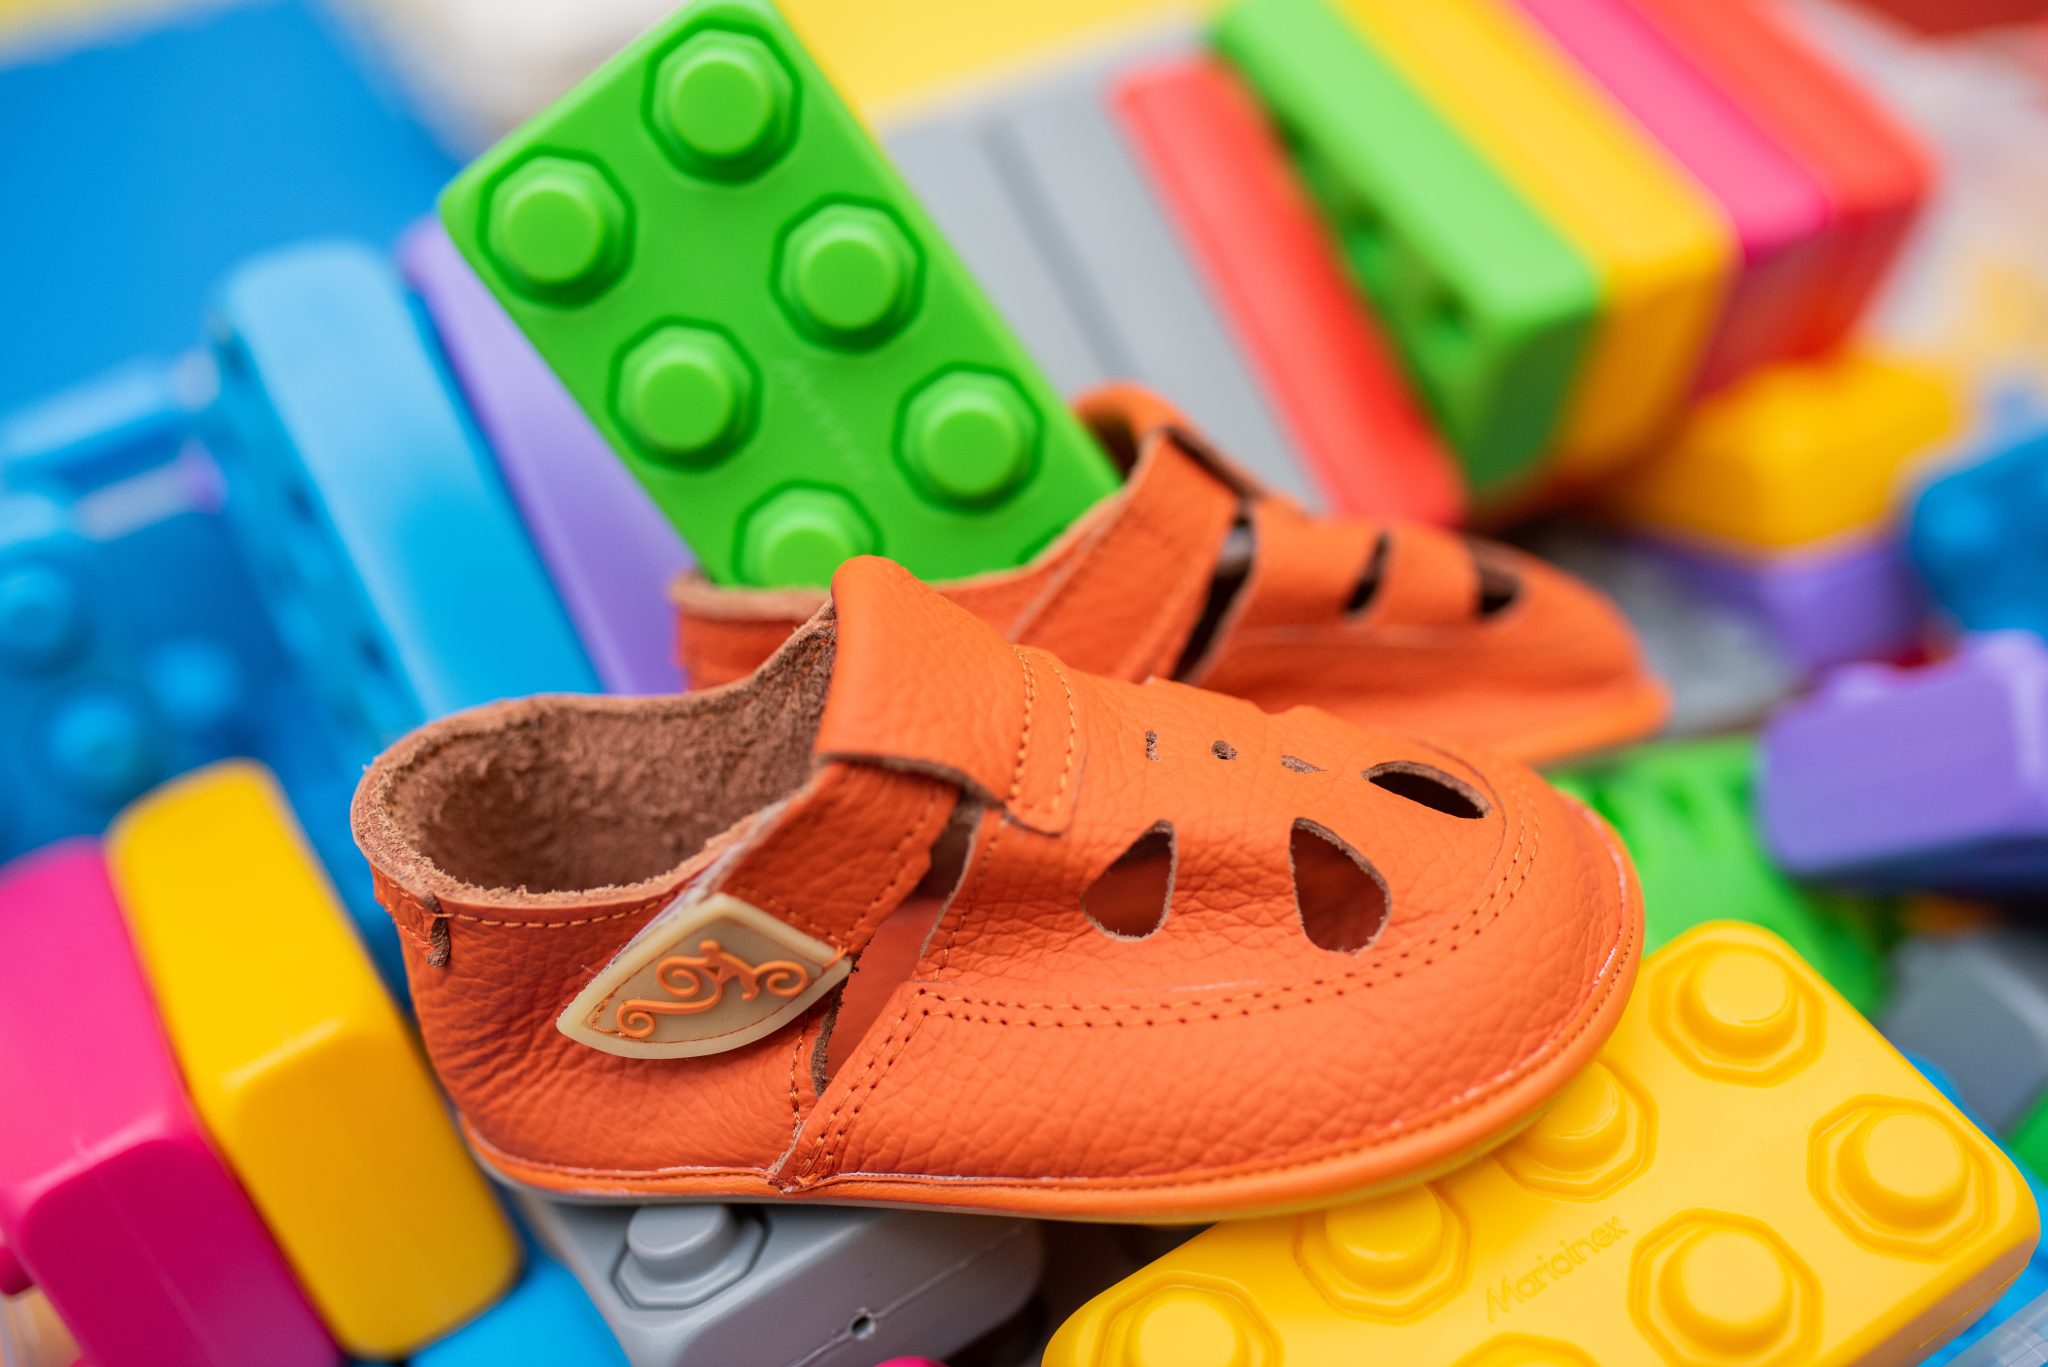 Travel Accessories for Kids, The Barefoot Kids